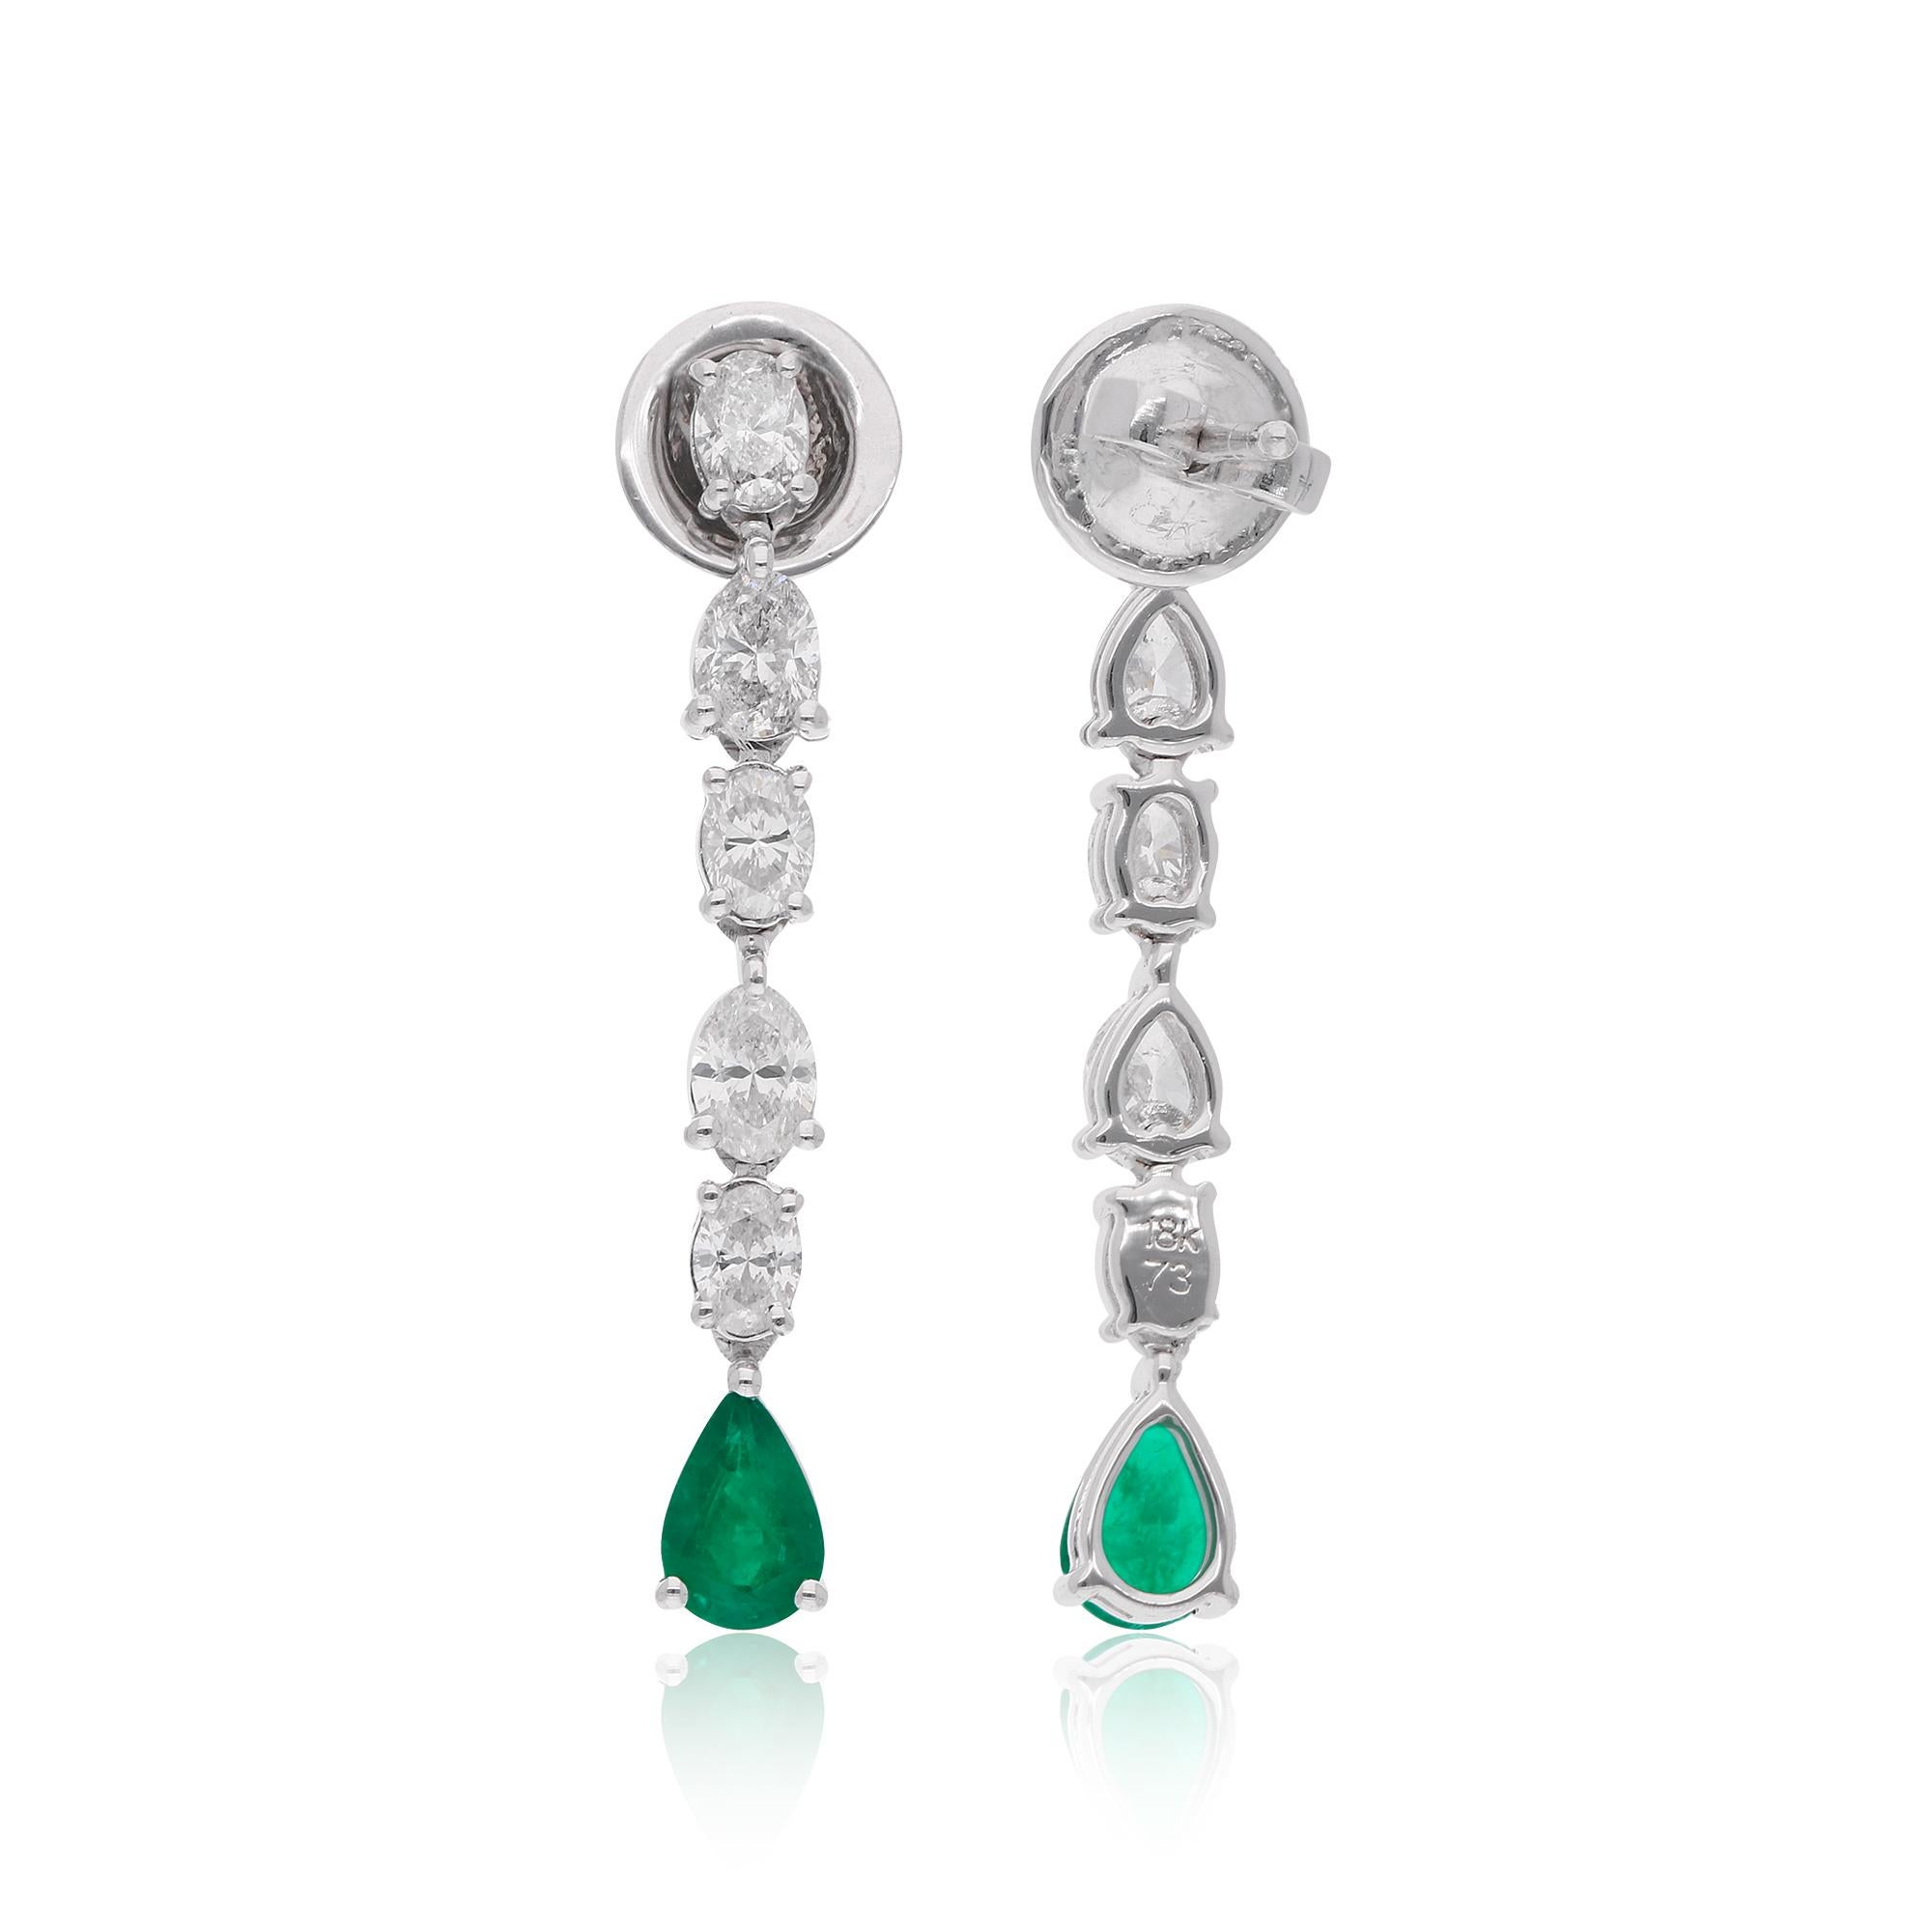 Item Code :- SEE-13051G
Gross Wt. :- 4.20 gm
18k White Gold Wt. :- 3.78 gm
Natural Diamond Wt. :- 1.37 Ct. ( AVERAGE DIAMOND CLARITY SI1-SI2 & COLOR H-I )
Natural Emerald Wt. :- 0.73 Ct.
Earrings Size :- 30 mm approx.

✦